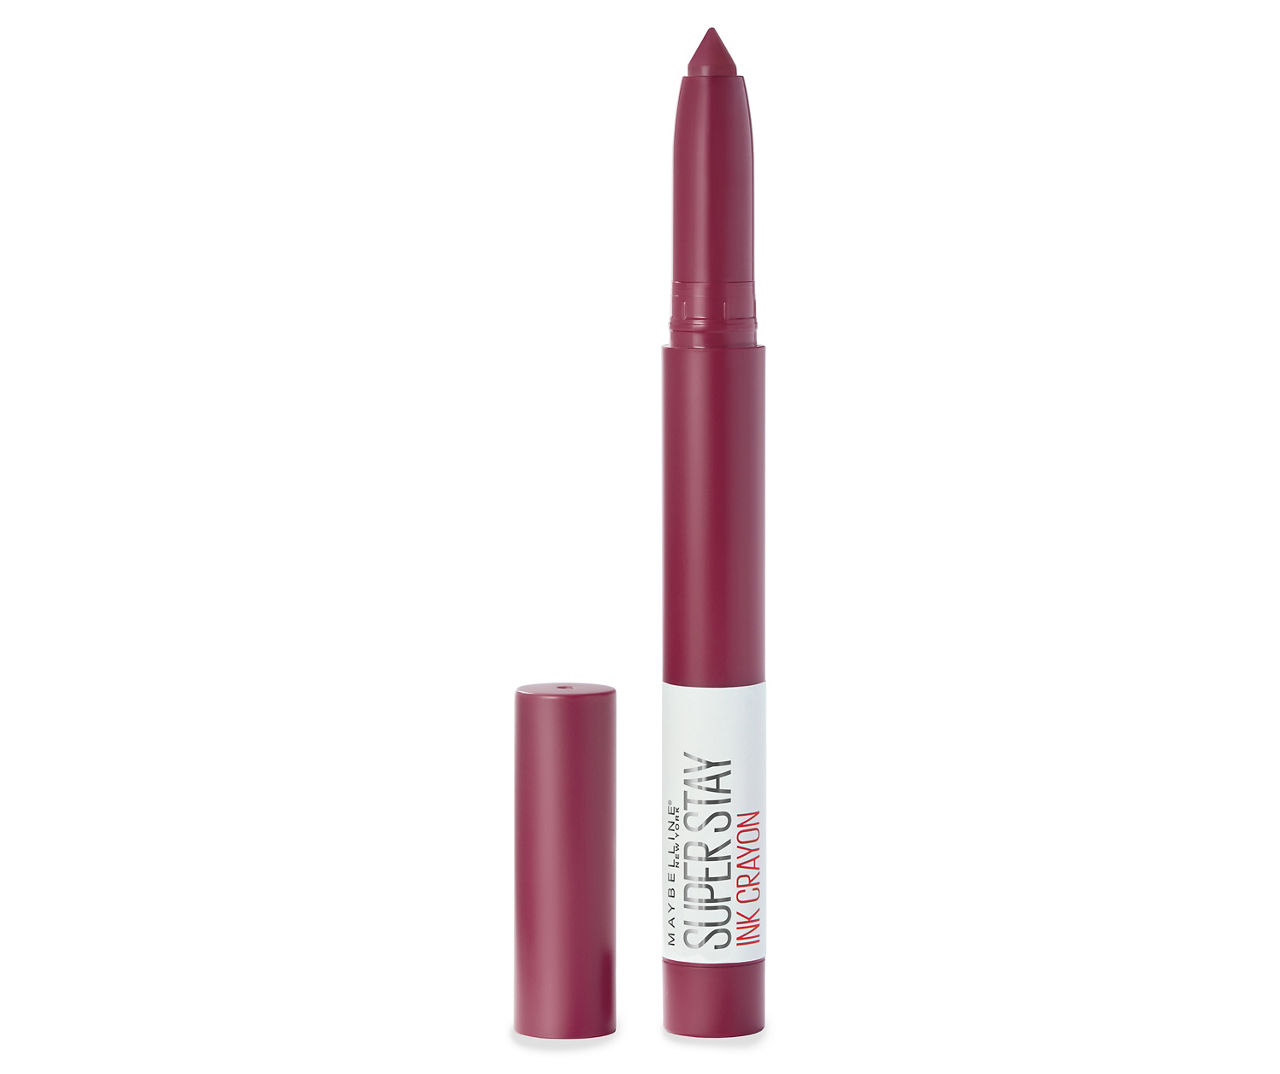 Superstay Ink Crayon Lipstick in Accept a Dare